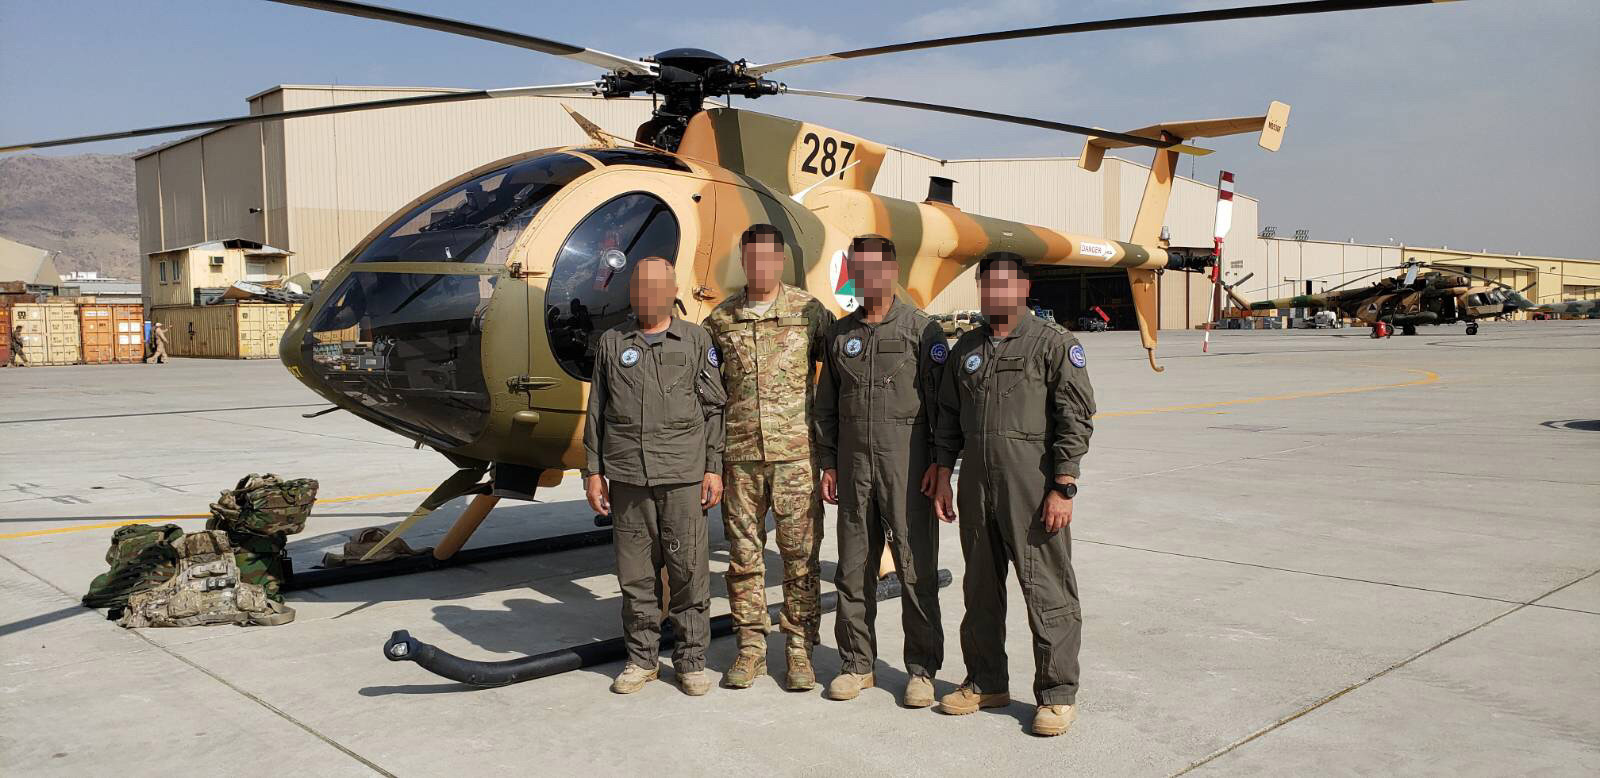 PHOTO: A group of Afghan pilots from two squadrons that flew MD530F helicopters are pictured together at an undisclosed location.